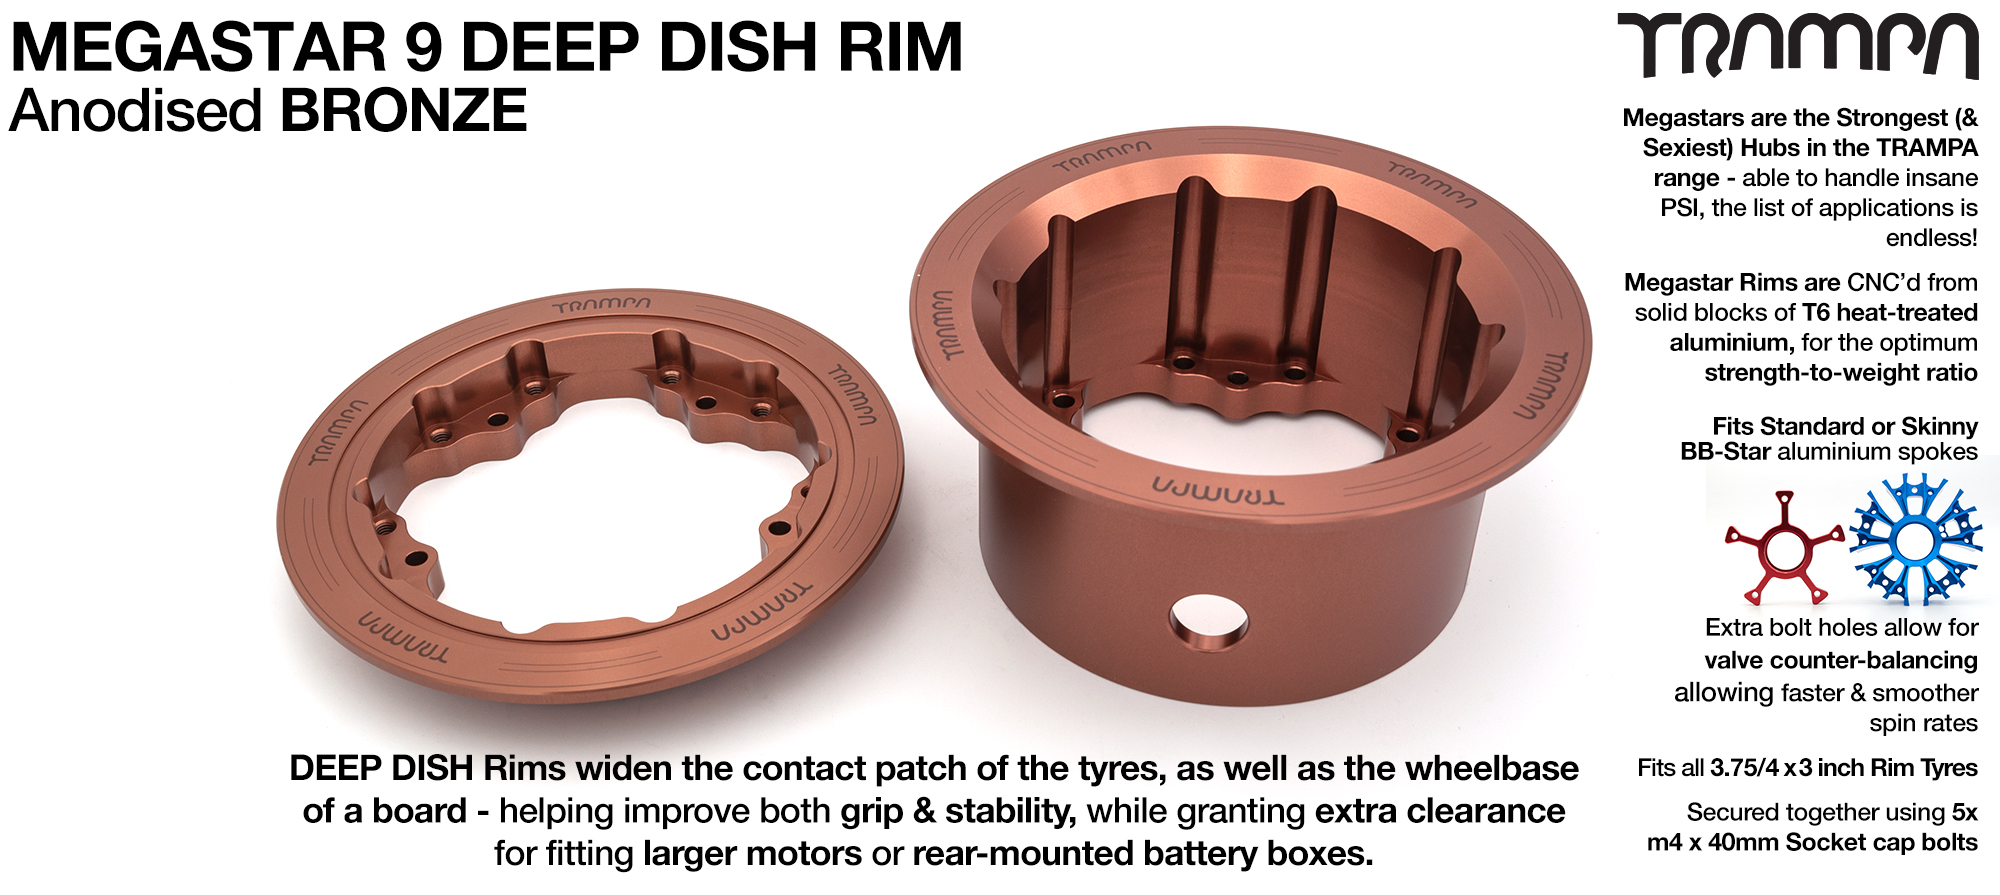 MEGASTAR 9 DEEP-DISH Rims Measure 3.75/4x 3 Inch. The Bearings are positioned OFF-SET & accept 4 Inch Rim Tyres to make 9 or 10 inch Wheels - BRONZE